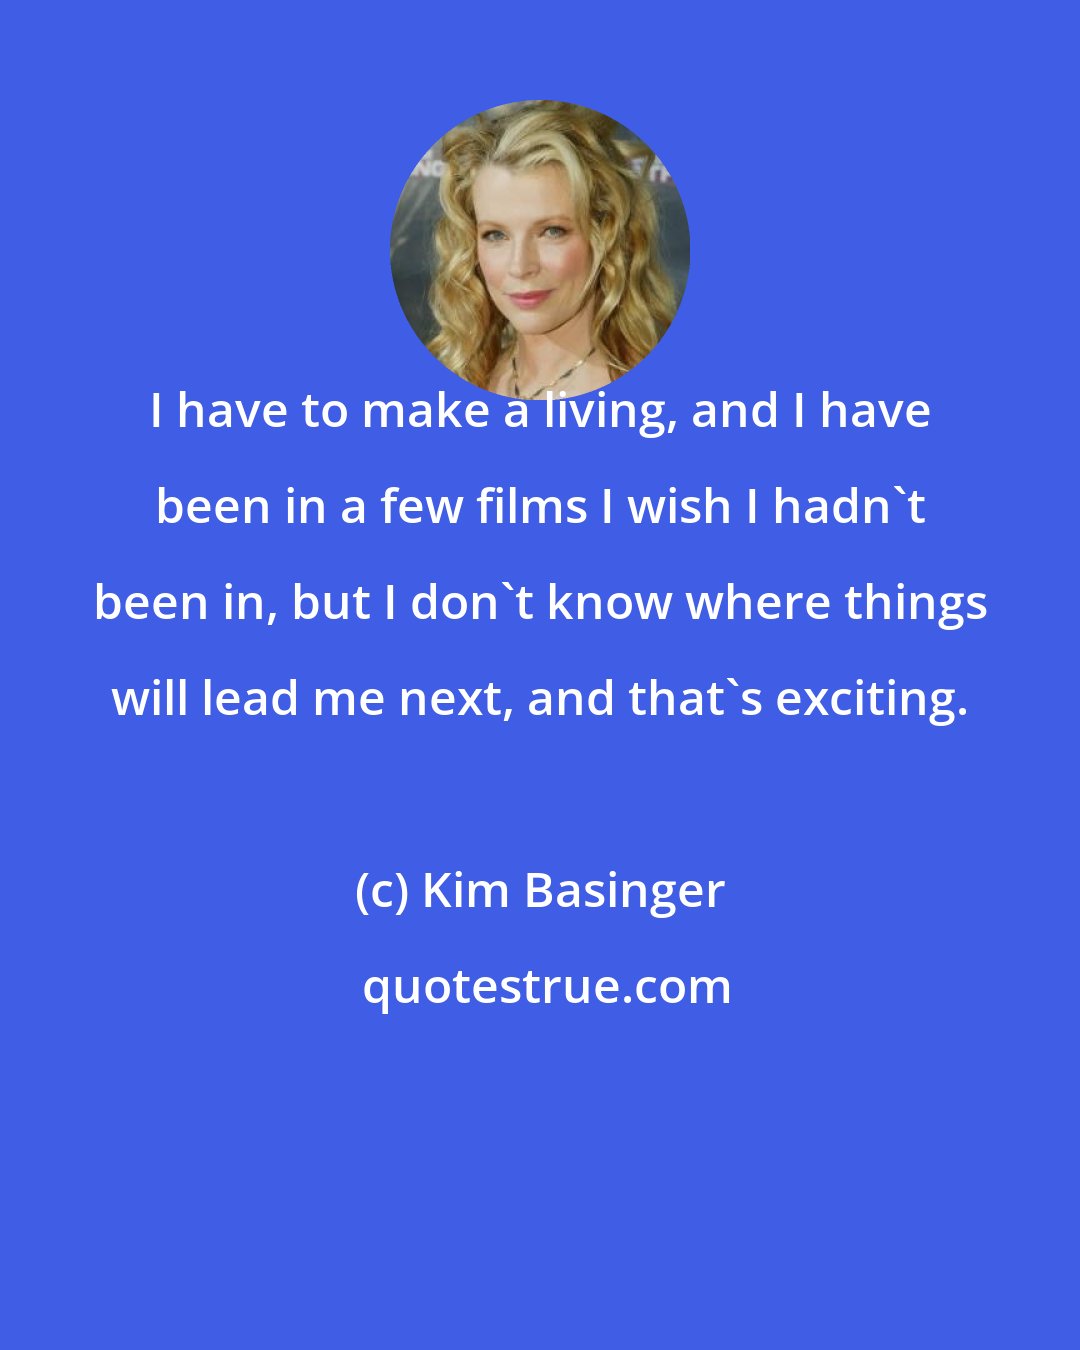 Kim Basinger: I have to make a living, and I have been in a few films I wish I hadn't been in, but I don't know where things will lead me next, and that's exciting.